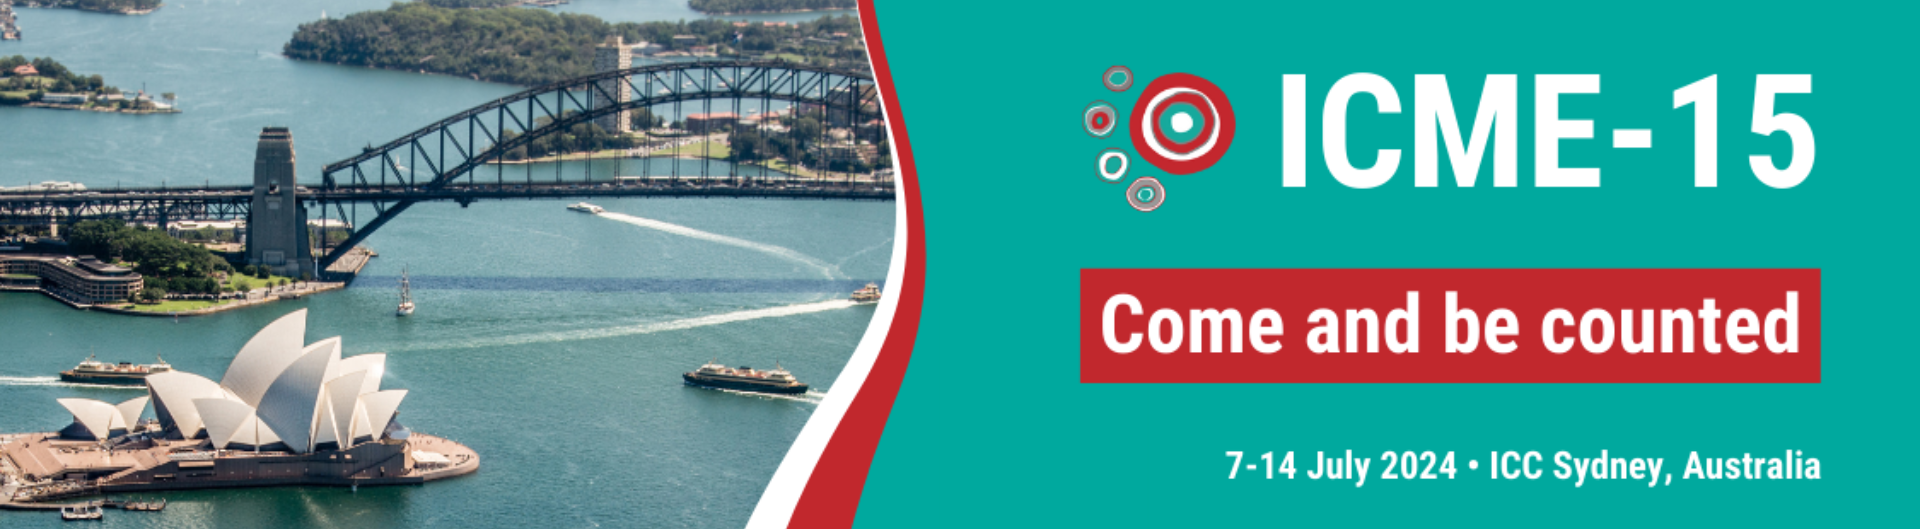 15th International Congress on Mathematics Education is coming to ICC Sydney on 7 to 14 July.